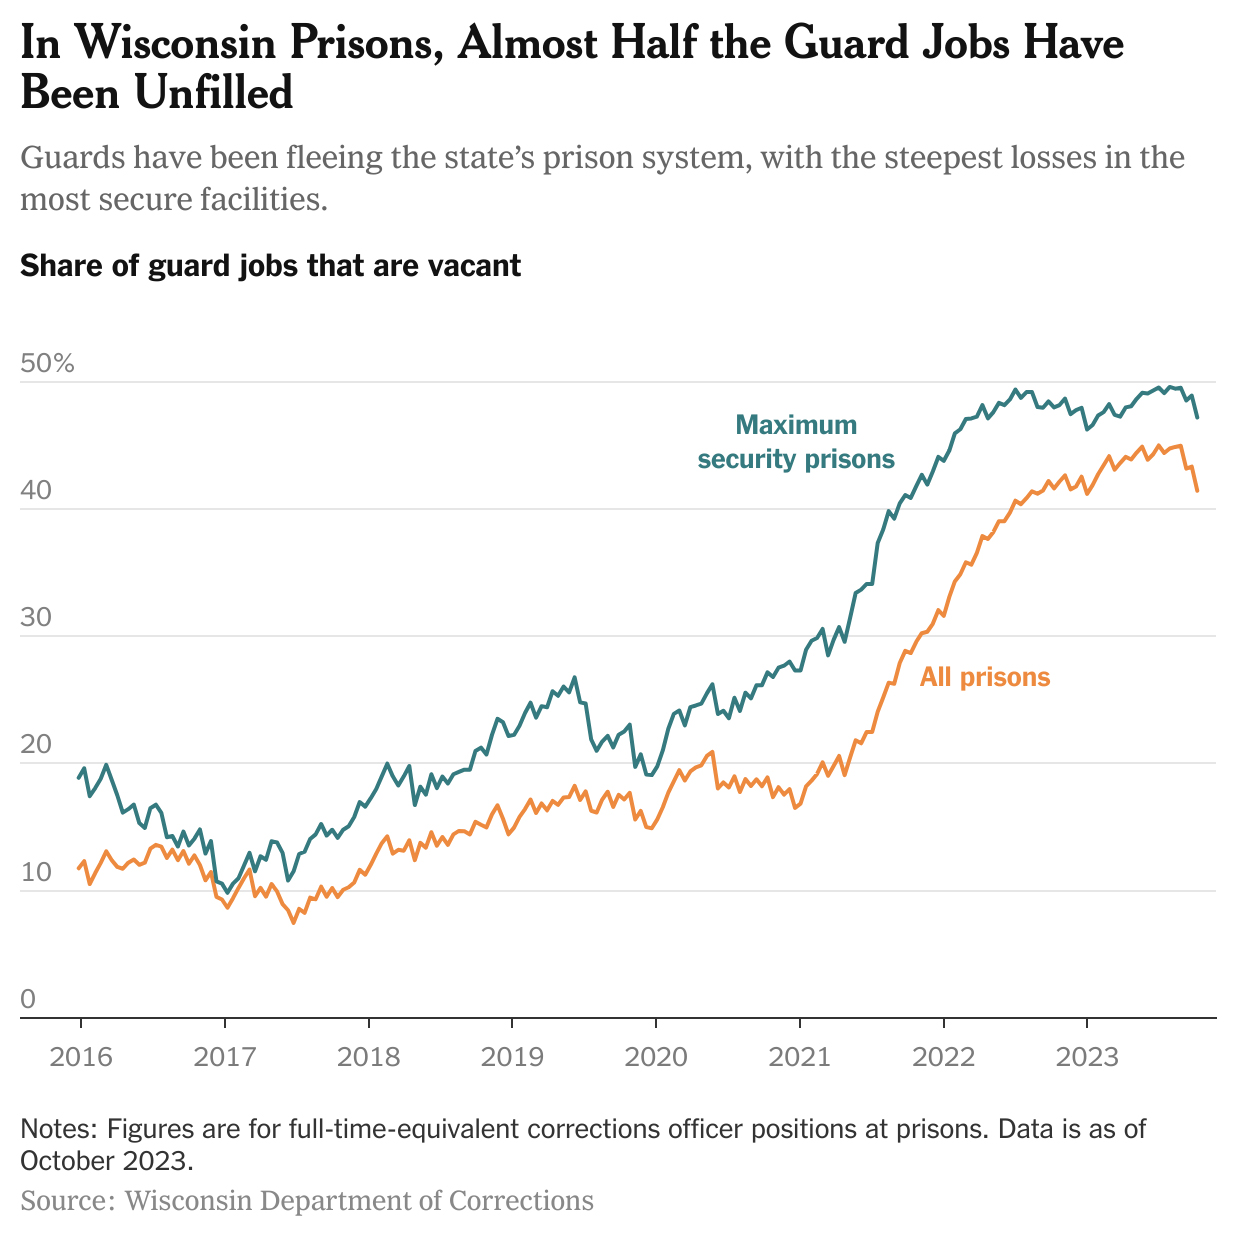 A chart with the title "In Wisconsin Prisons, Almost Half the Guard Jobs Have Been Unfilled" and the subtitle "Guards have been fleeing the state's prison system, with the steepest losses in the most secure facilities" show the share of guard jobs that are vacant in maximum security prisons and all prisons between 2016 and 2023.